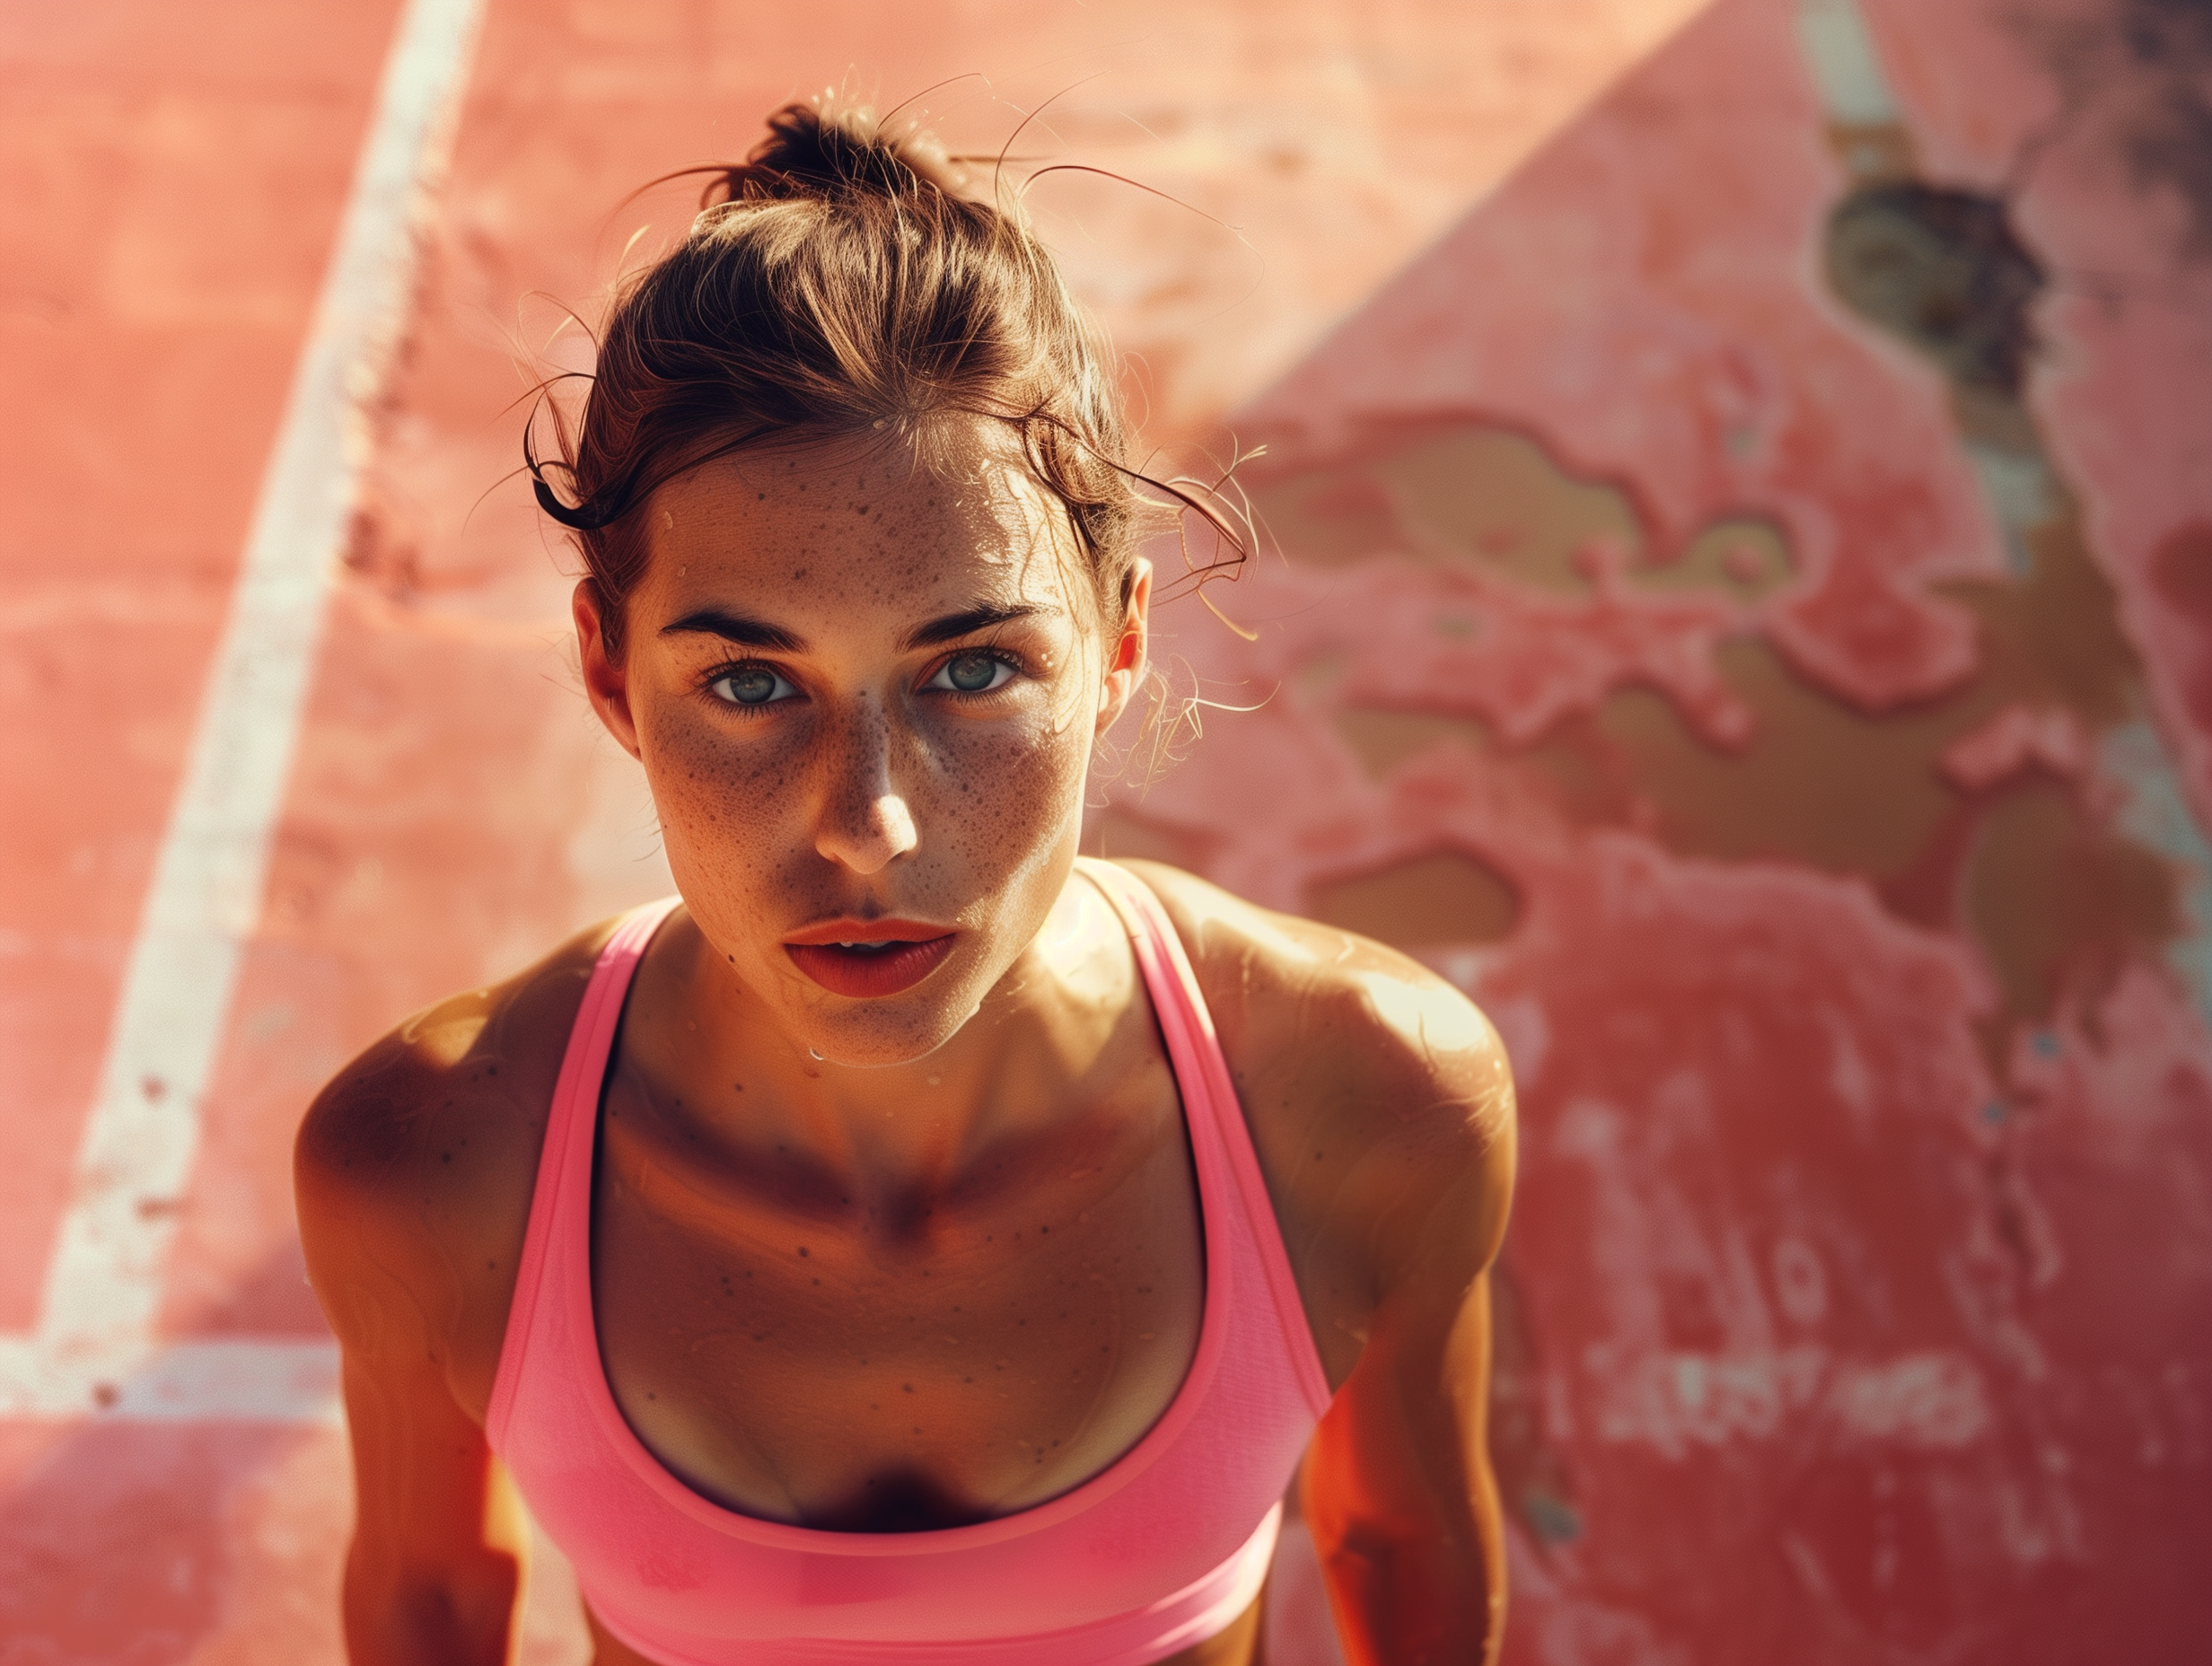 A young woman in a pink sports bra, looking up with a focused expression after an intense workout. She is standing on a worn, red athletic track, her skin glistening with sweat. The background features weathered lines and markings, emphasizing the dedication and perseverance required to maintain fitness and turn delays into productive exercise for busy women.